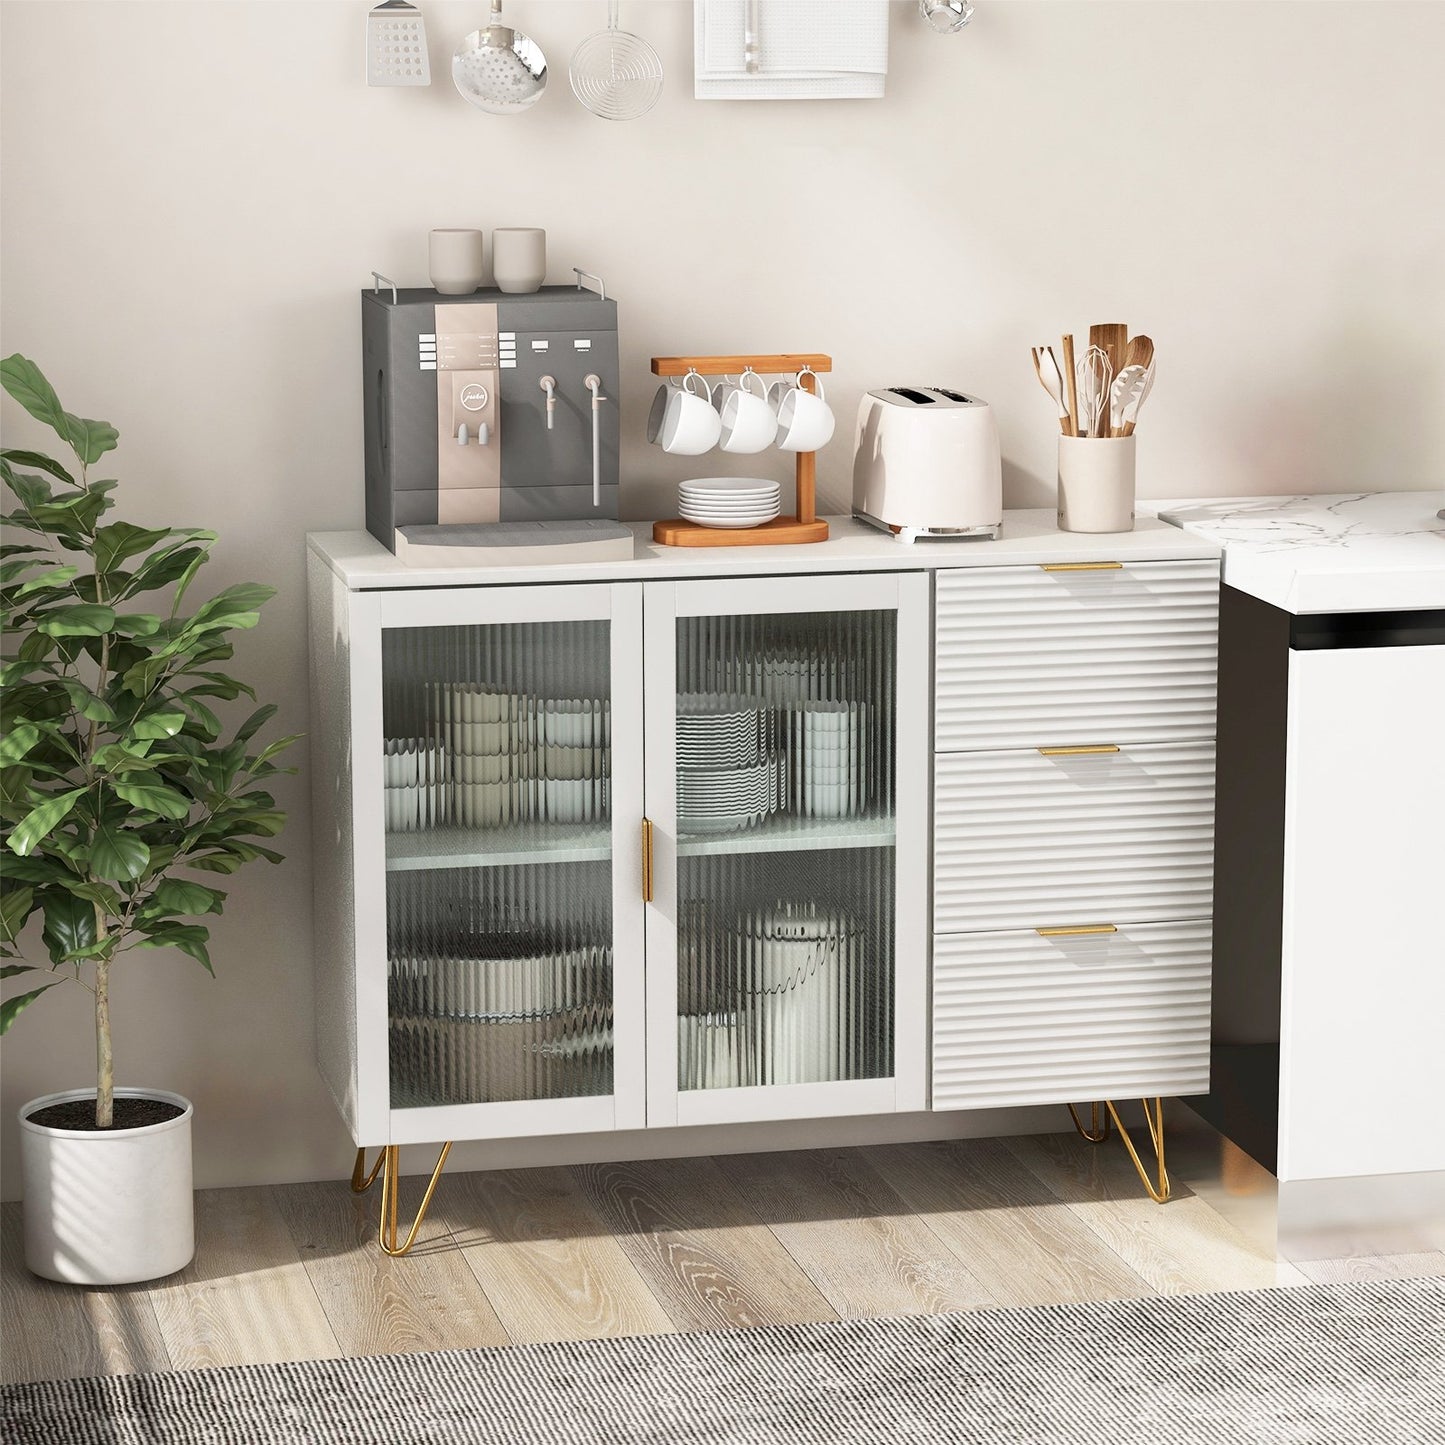 Modern Sideboard Buffet Cabinet with 2 Doors and 3 Drawers for Living Room Dining Room, White